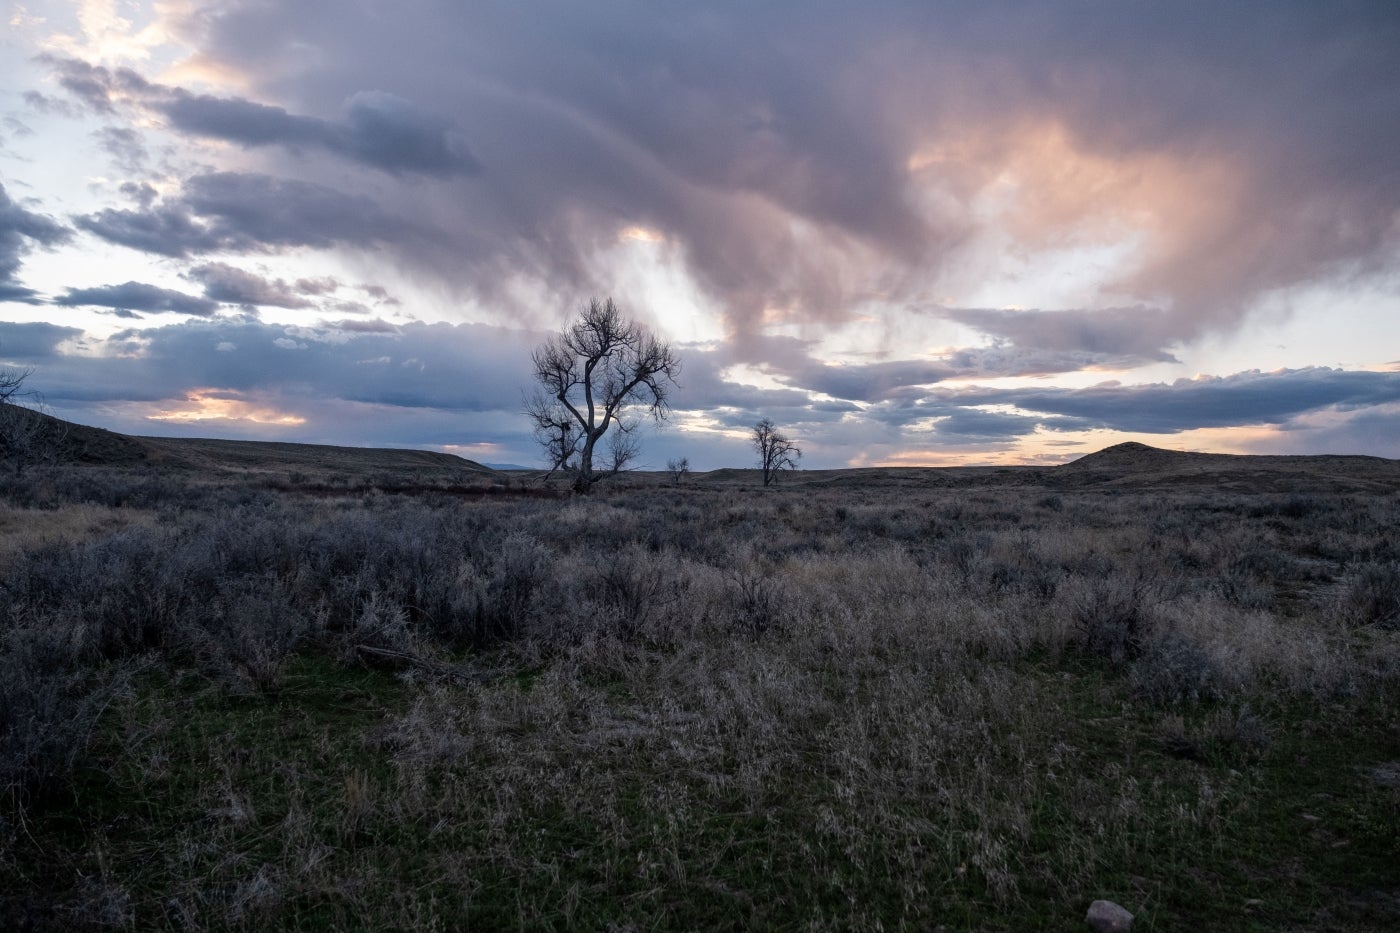 A prairie landscape with short grasses and a few trees in the Box Elder region of central Montana